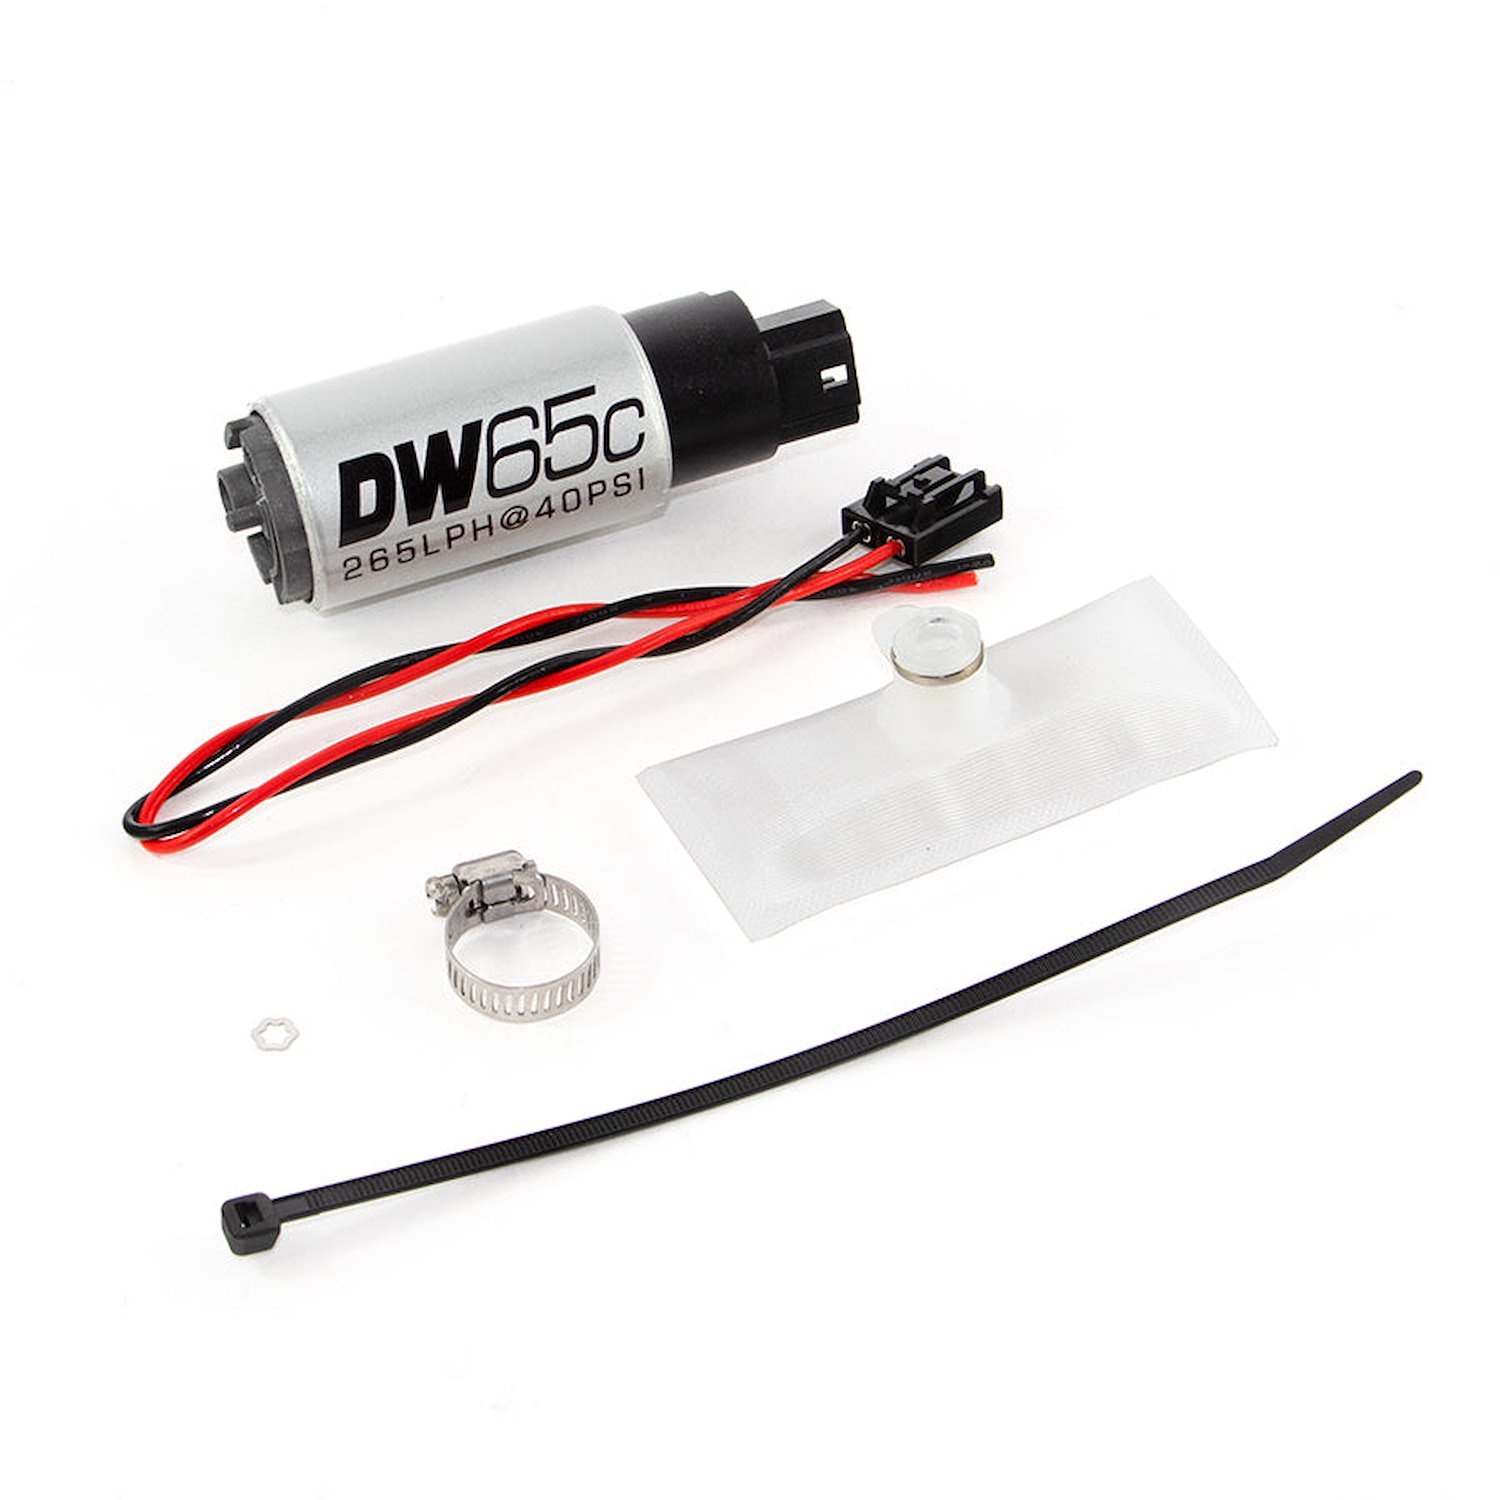 96511030 DW65C Series 265lph Compact Fuel Pump with Install Kit for BMW